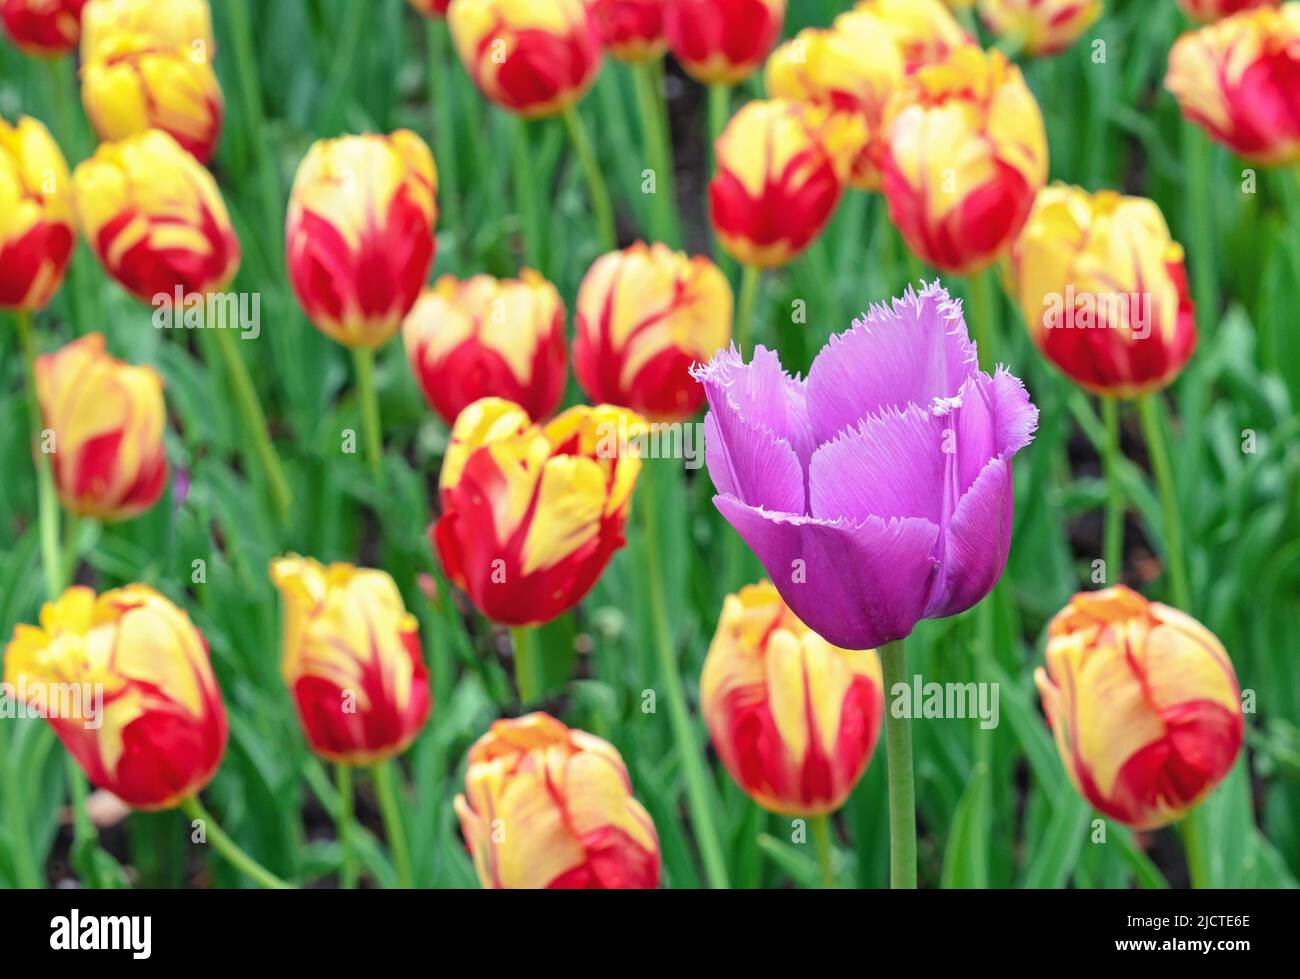 Purple terry tulip on the background of yellow-red tulips. Blooming Gesner's tulips. Stock Photo